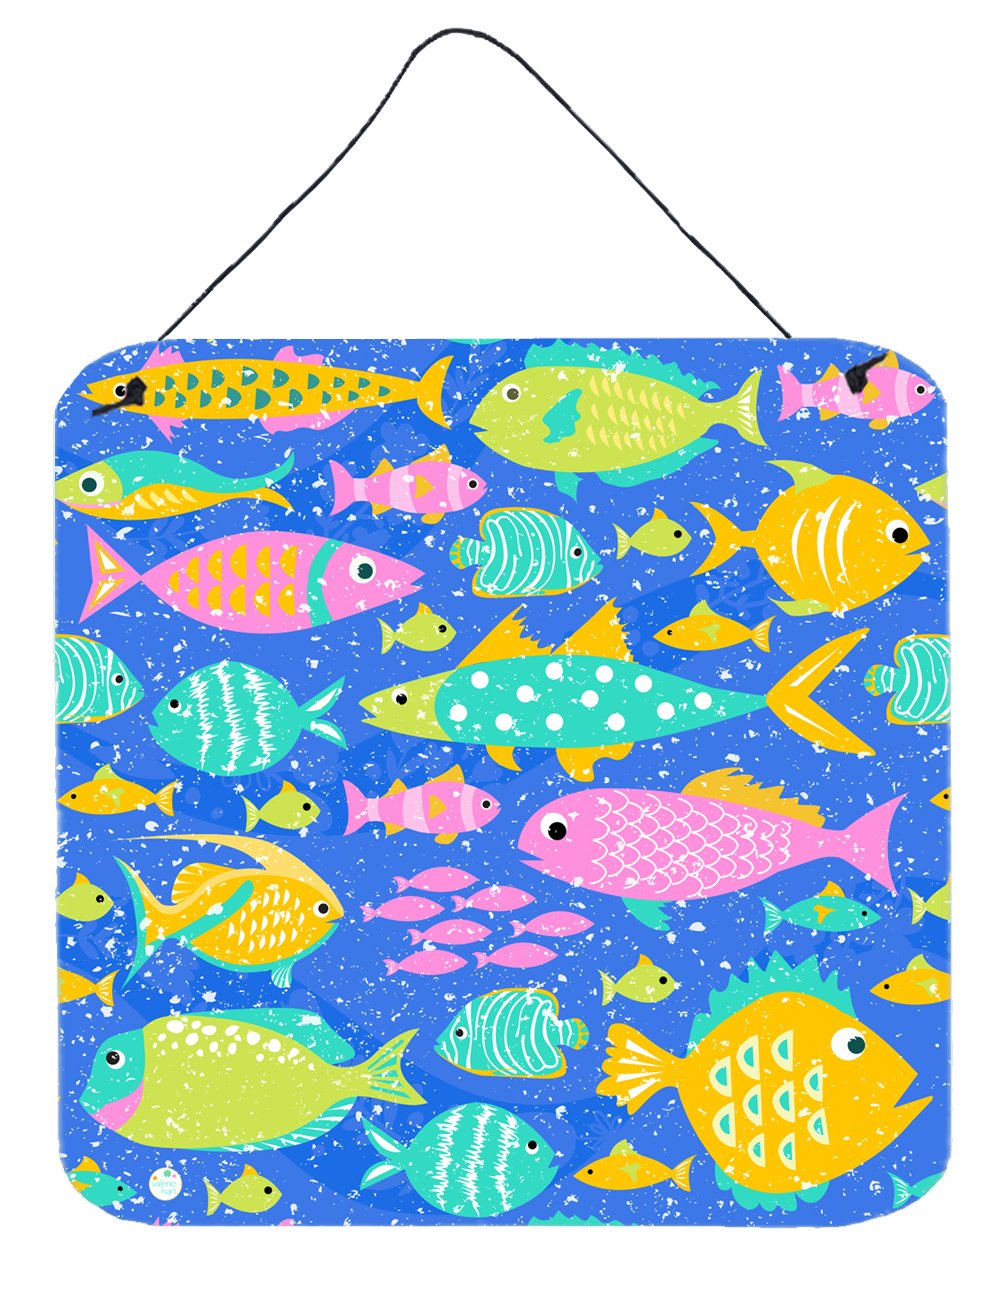 Little Colorful Fishes Wall or Door Hanging Prints VHA3034DS66 by Caroline's Treasures